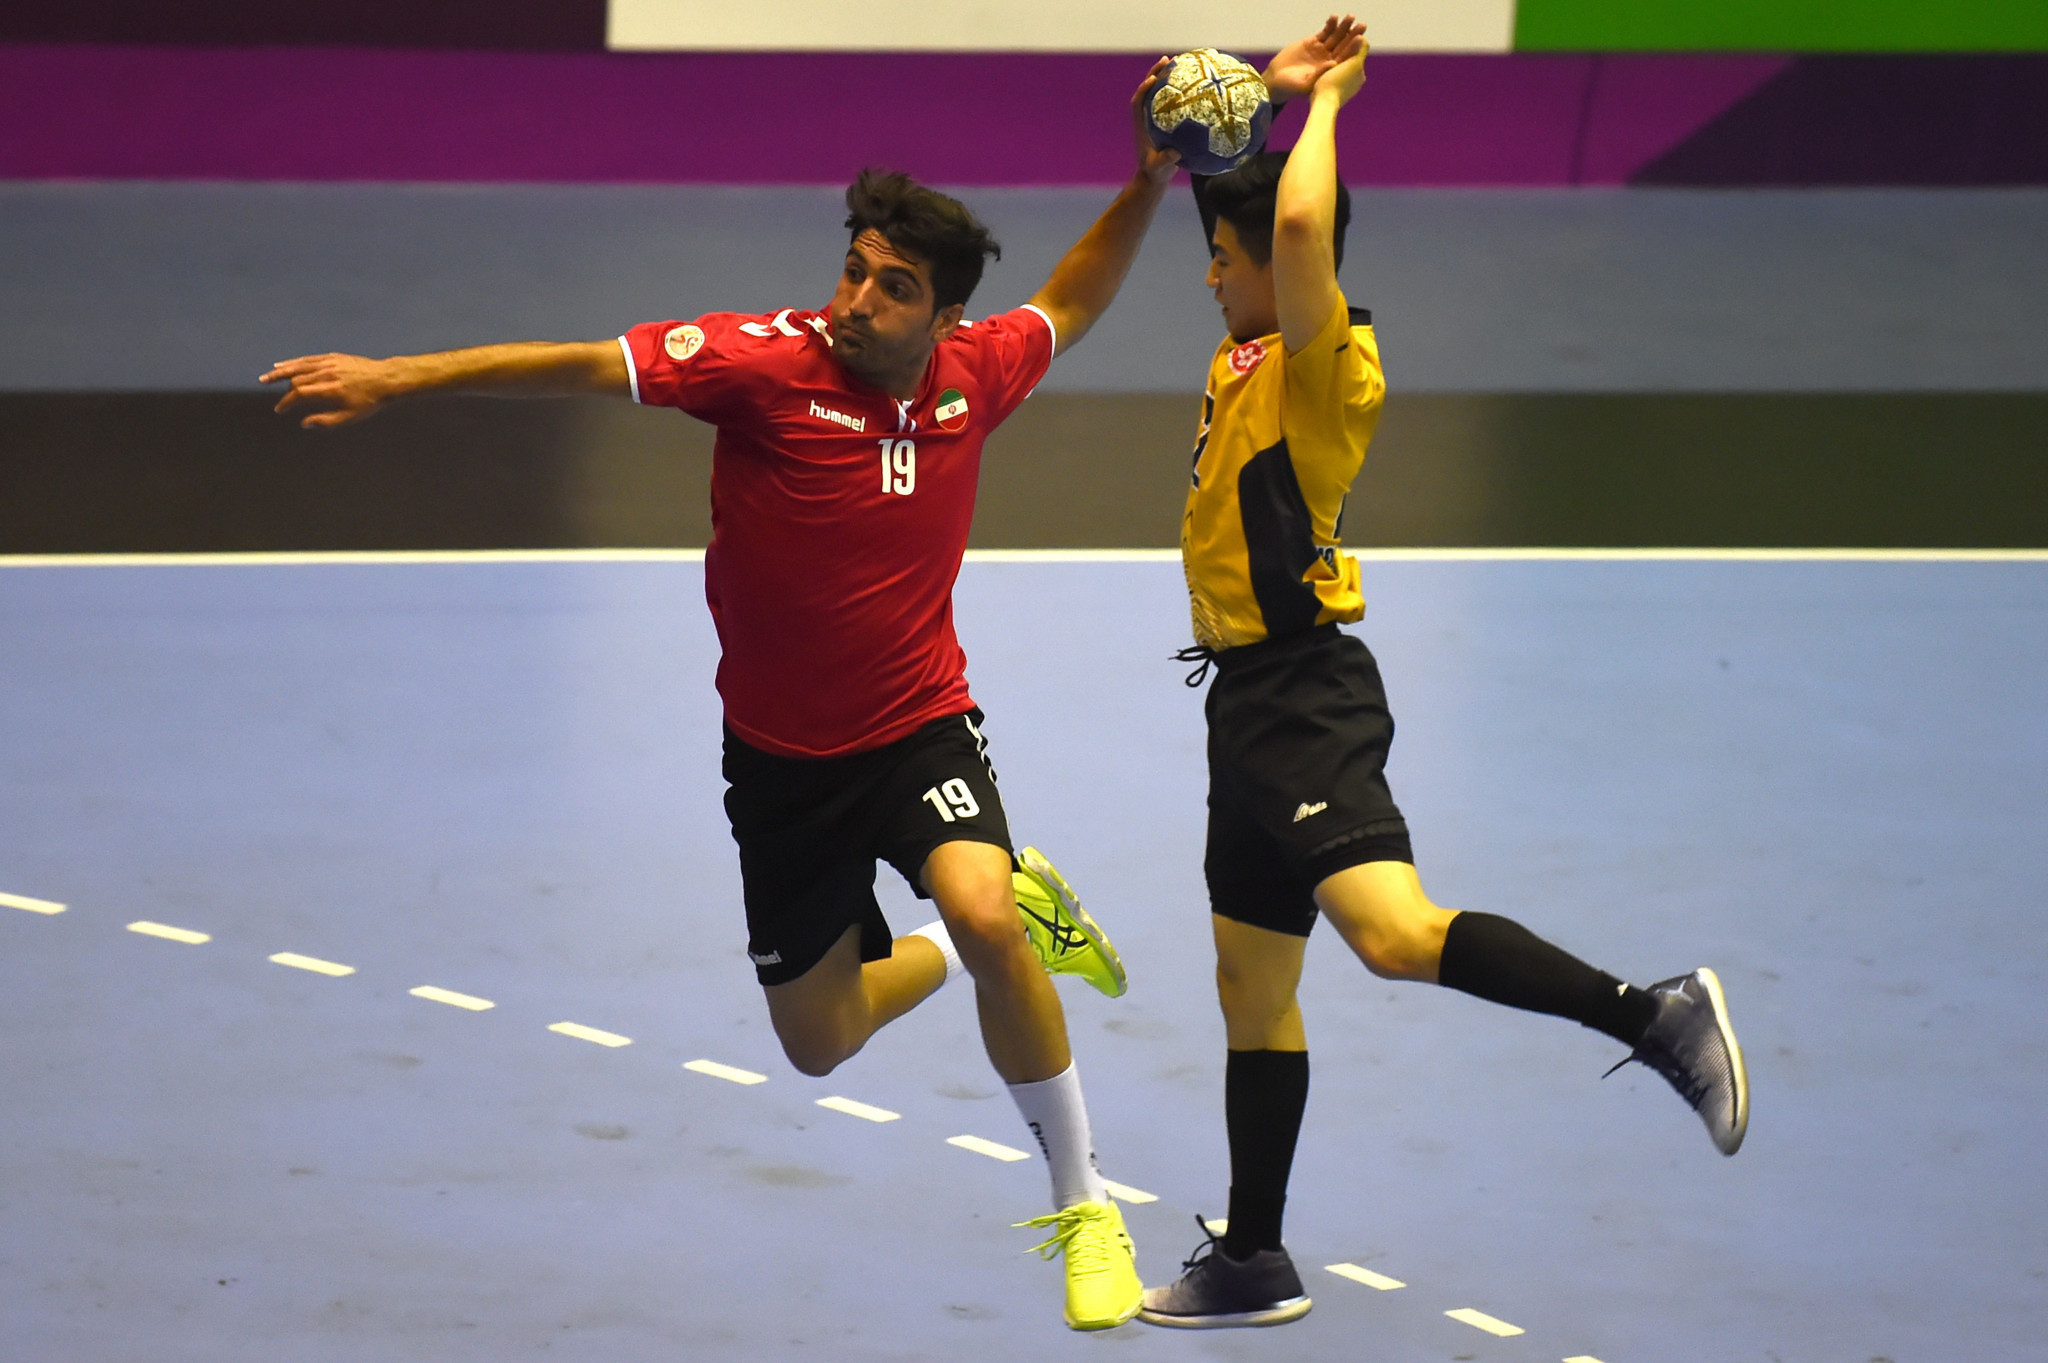 Iran defeated Kuwait by one goal to progress to the semi-finals ©Getty Images